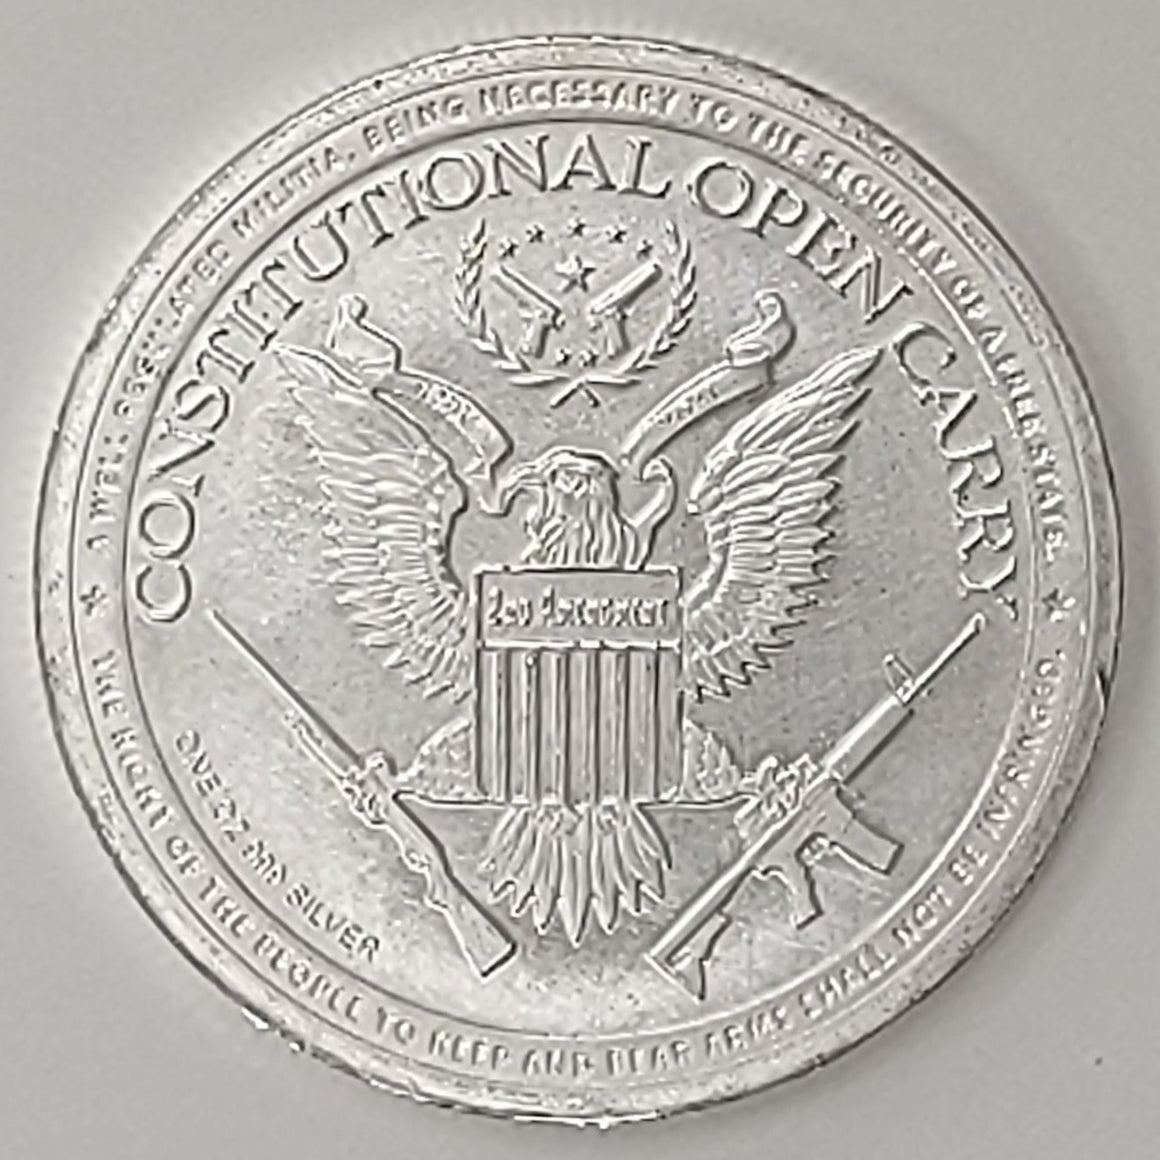 Constitutional Carry 1oz .999 Silver Round